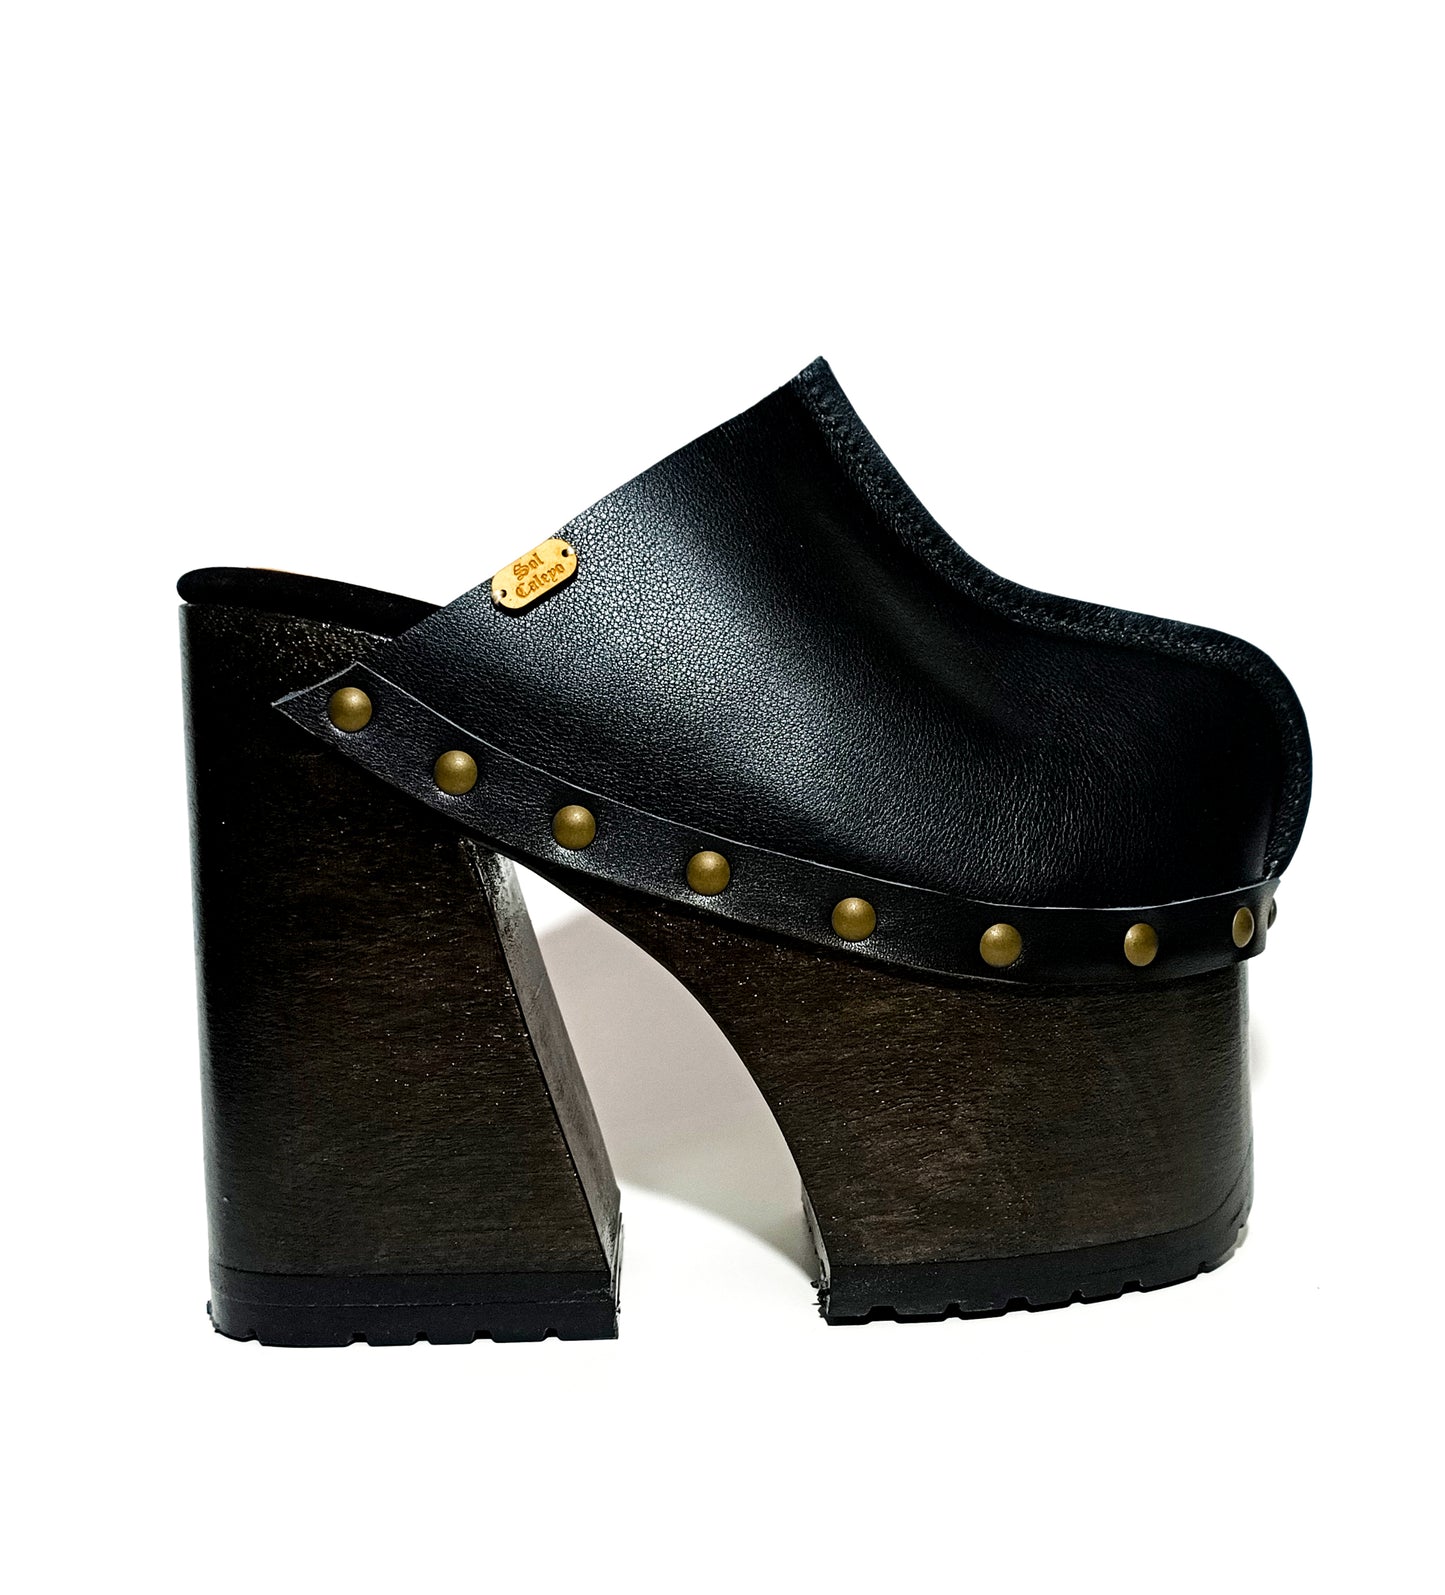 Vintage 70s style platform clogs, with super high heel, made in black leather. Sizes 34 to 47, handmade. Reserve yours now! Show an authentic vintage style!